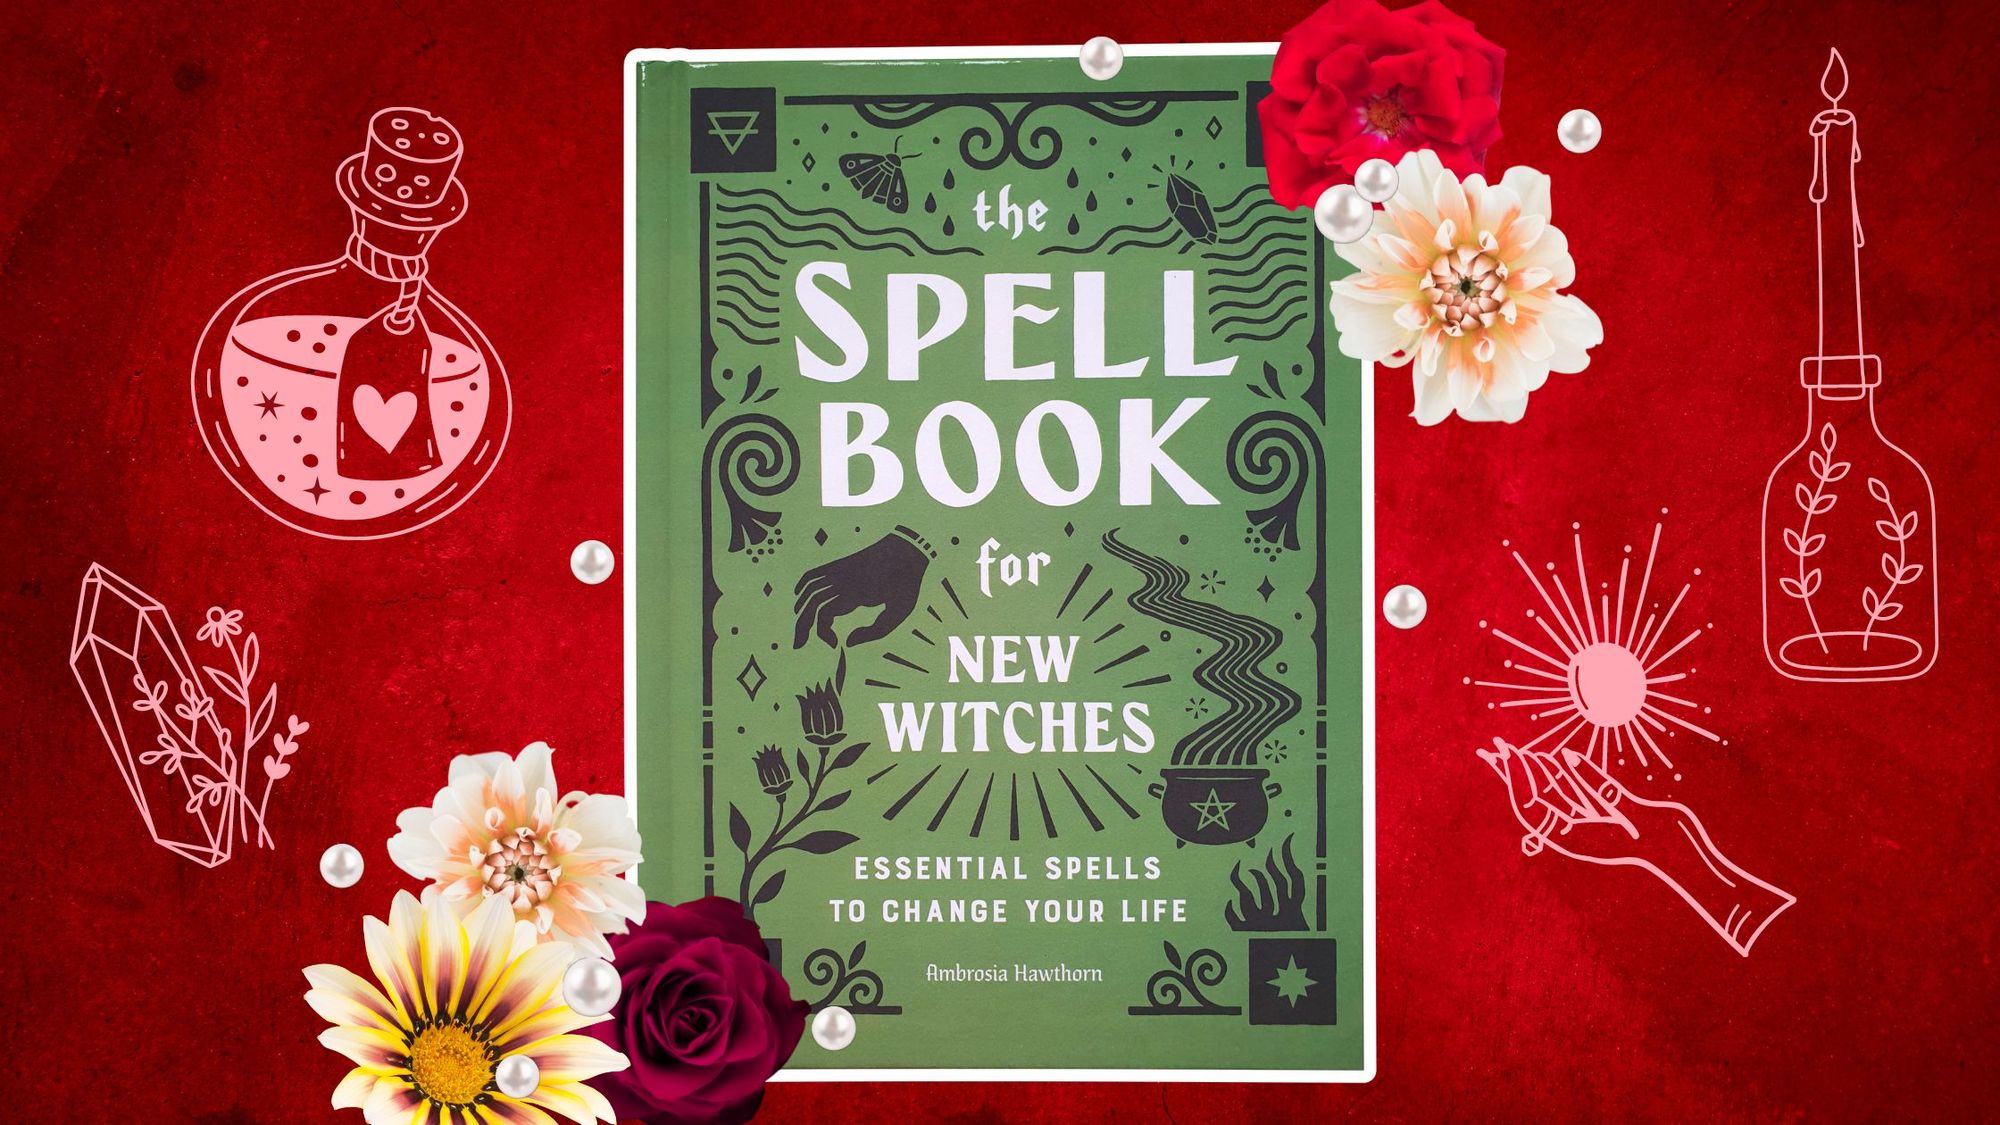 7 Recommended Books on Witchcraft for Modern-Day Witches